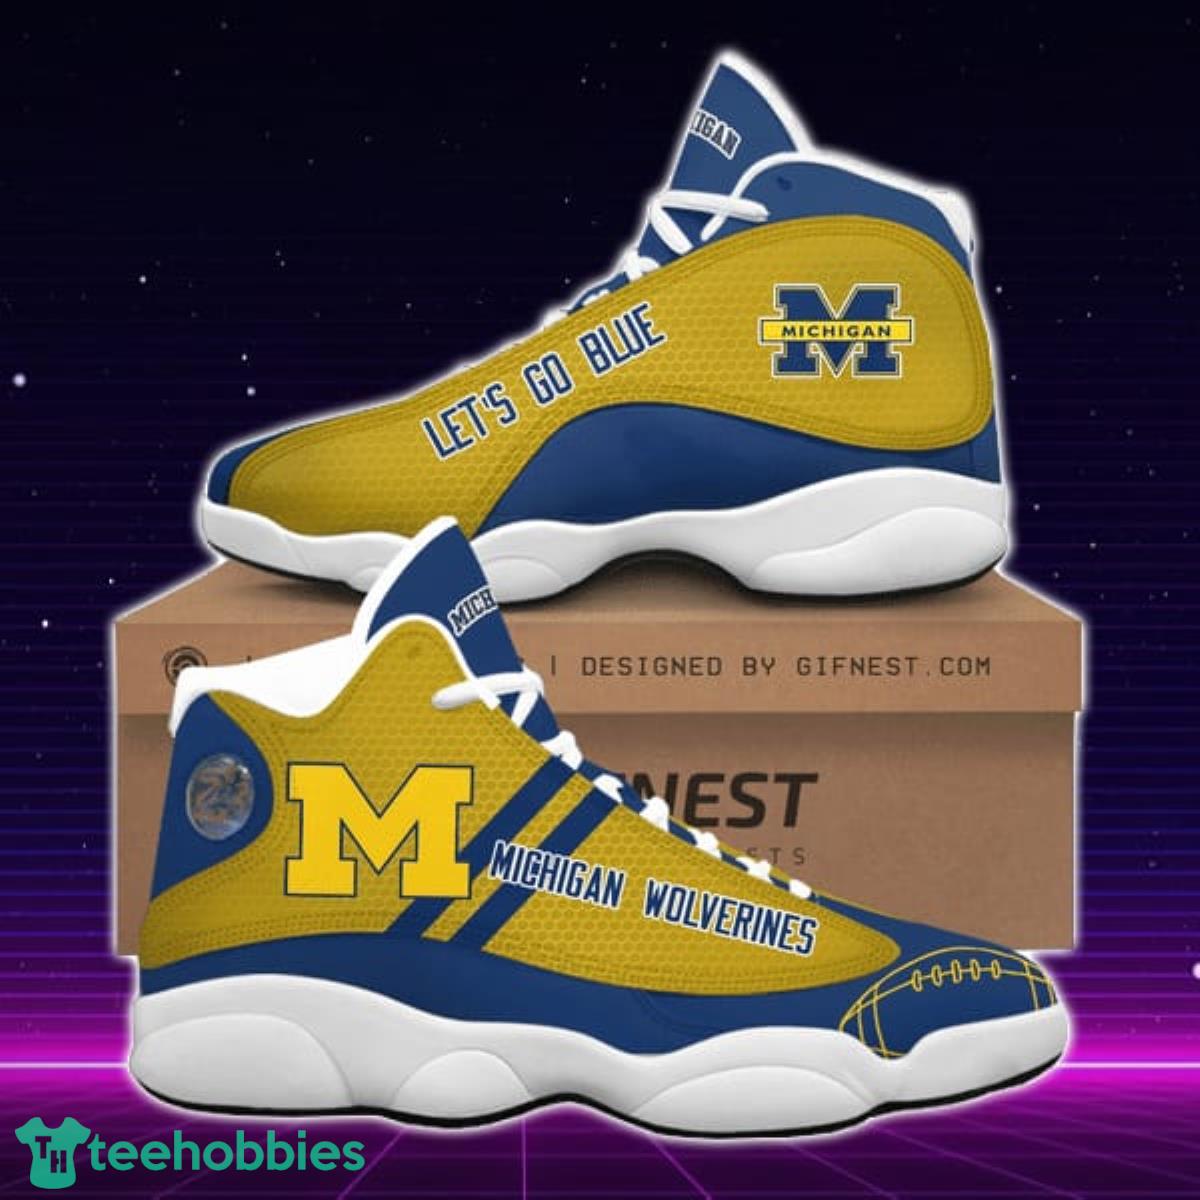 Michigan Wolverines Air Jordan 13 Sneakers Special Gift For Men And Women Product Photo 1